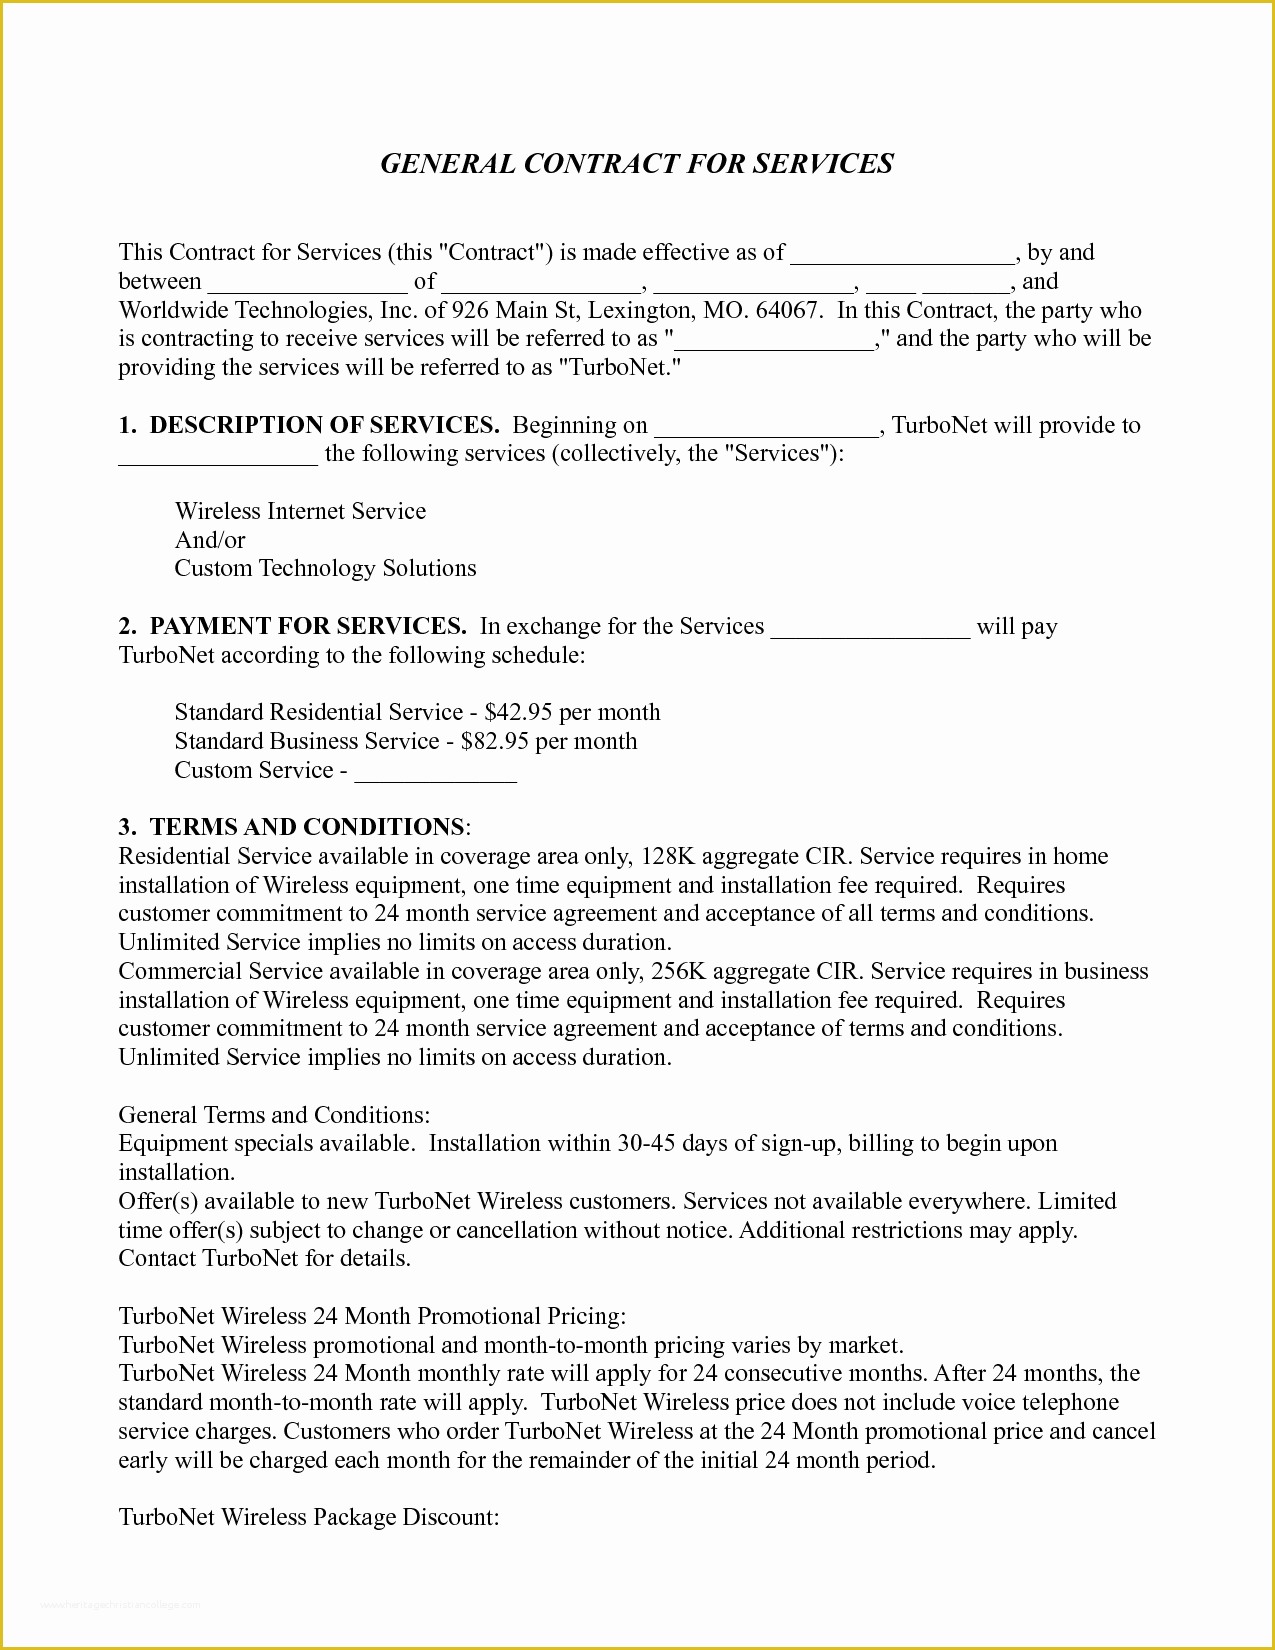 Service Agreement Template Free Of General Service Contract by Emm General Contract